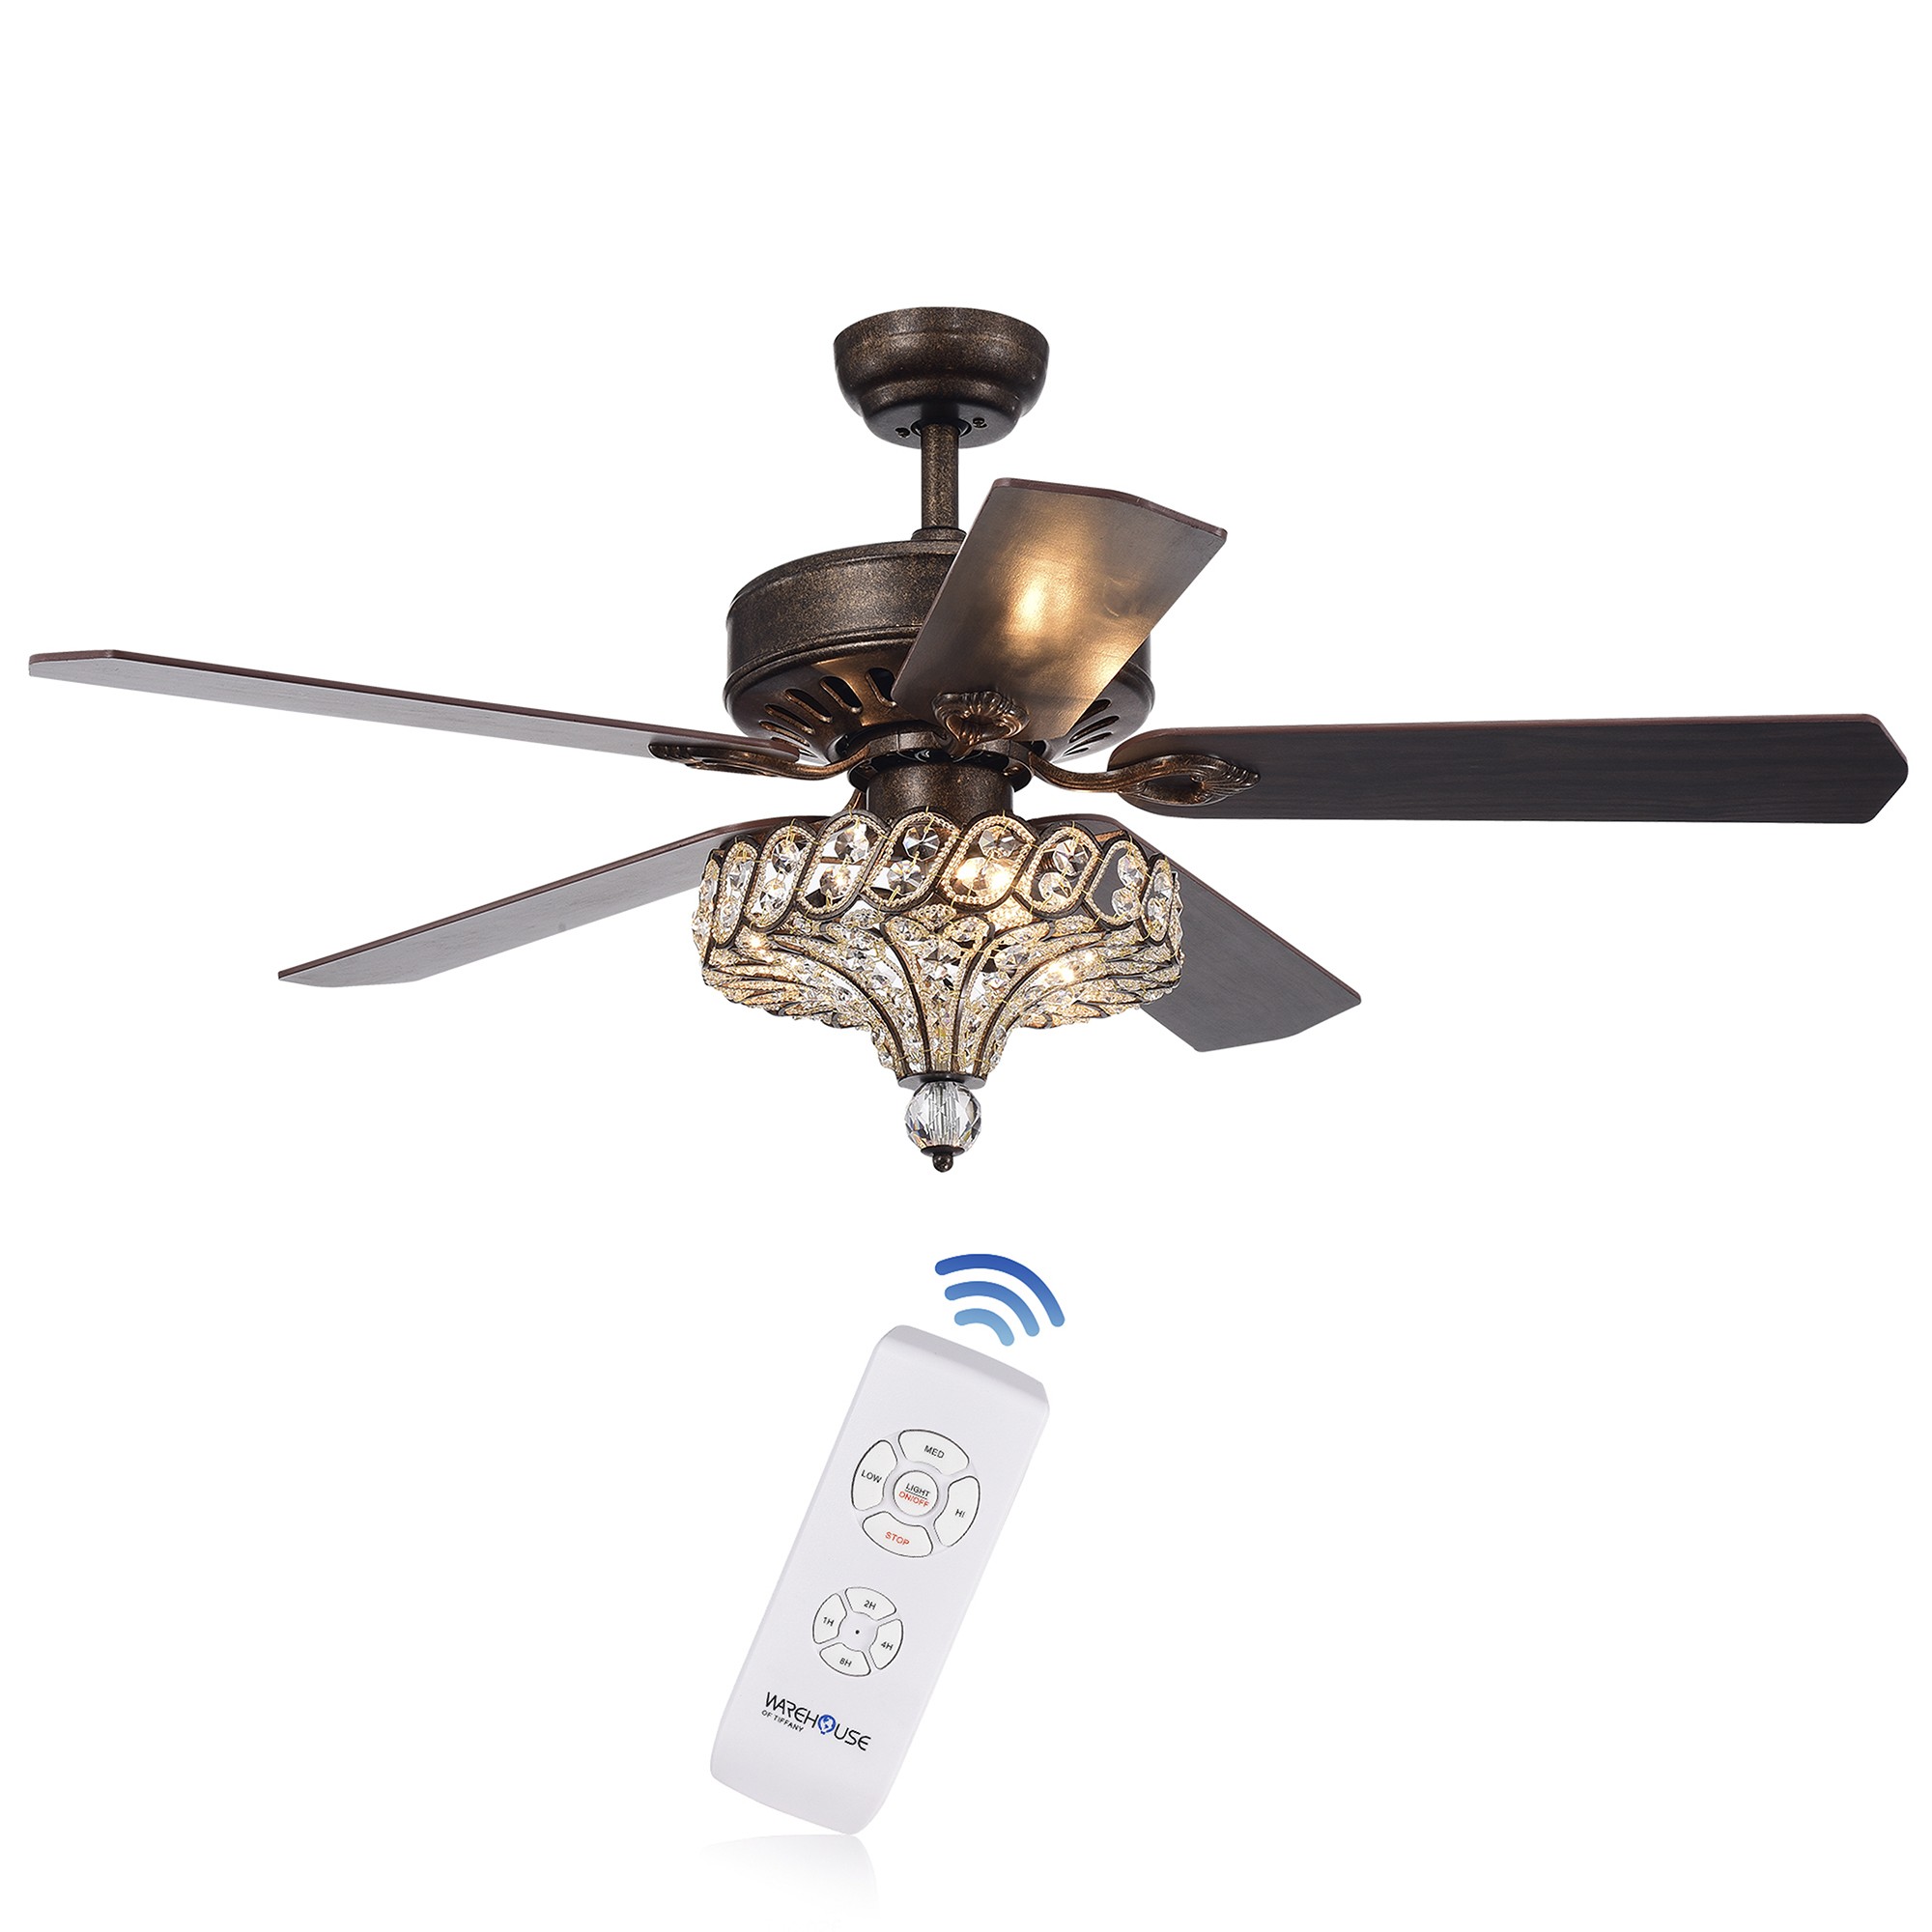 Pilette 5-Blade Antique Speckled Bronze Lighted Ceiling Fan w Crystal Shade Optional Remote Control (incl 2 Color Choice Blades)